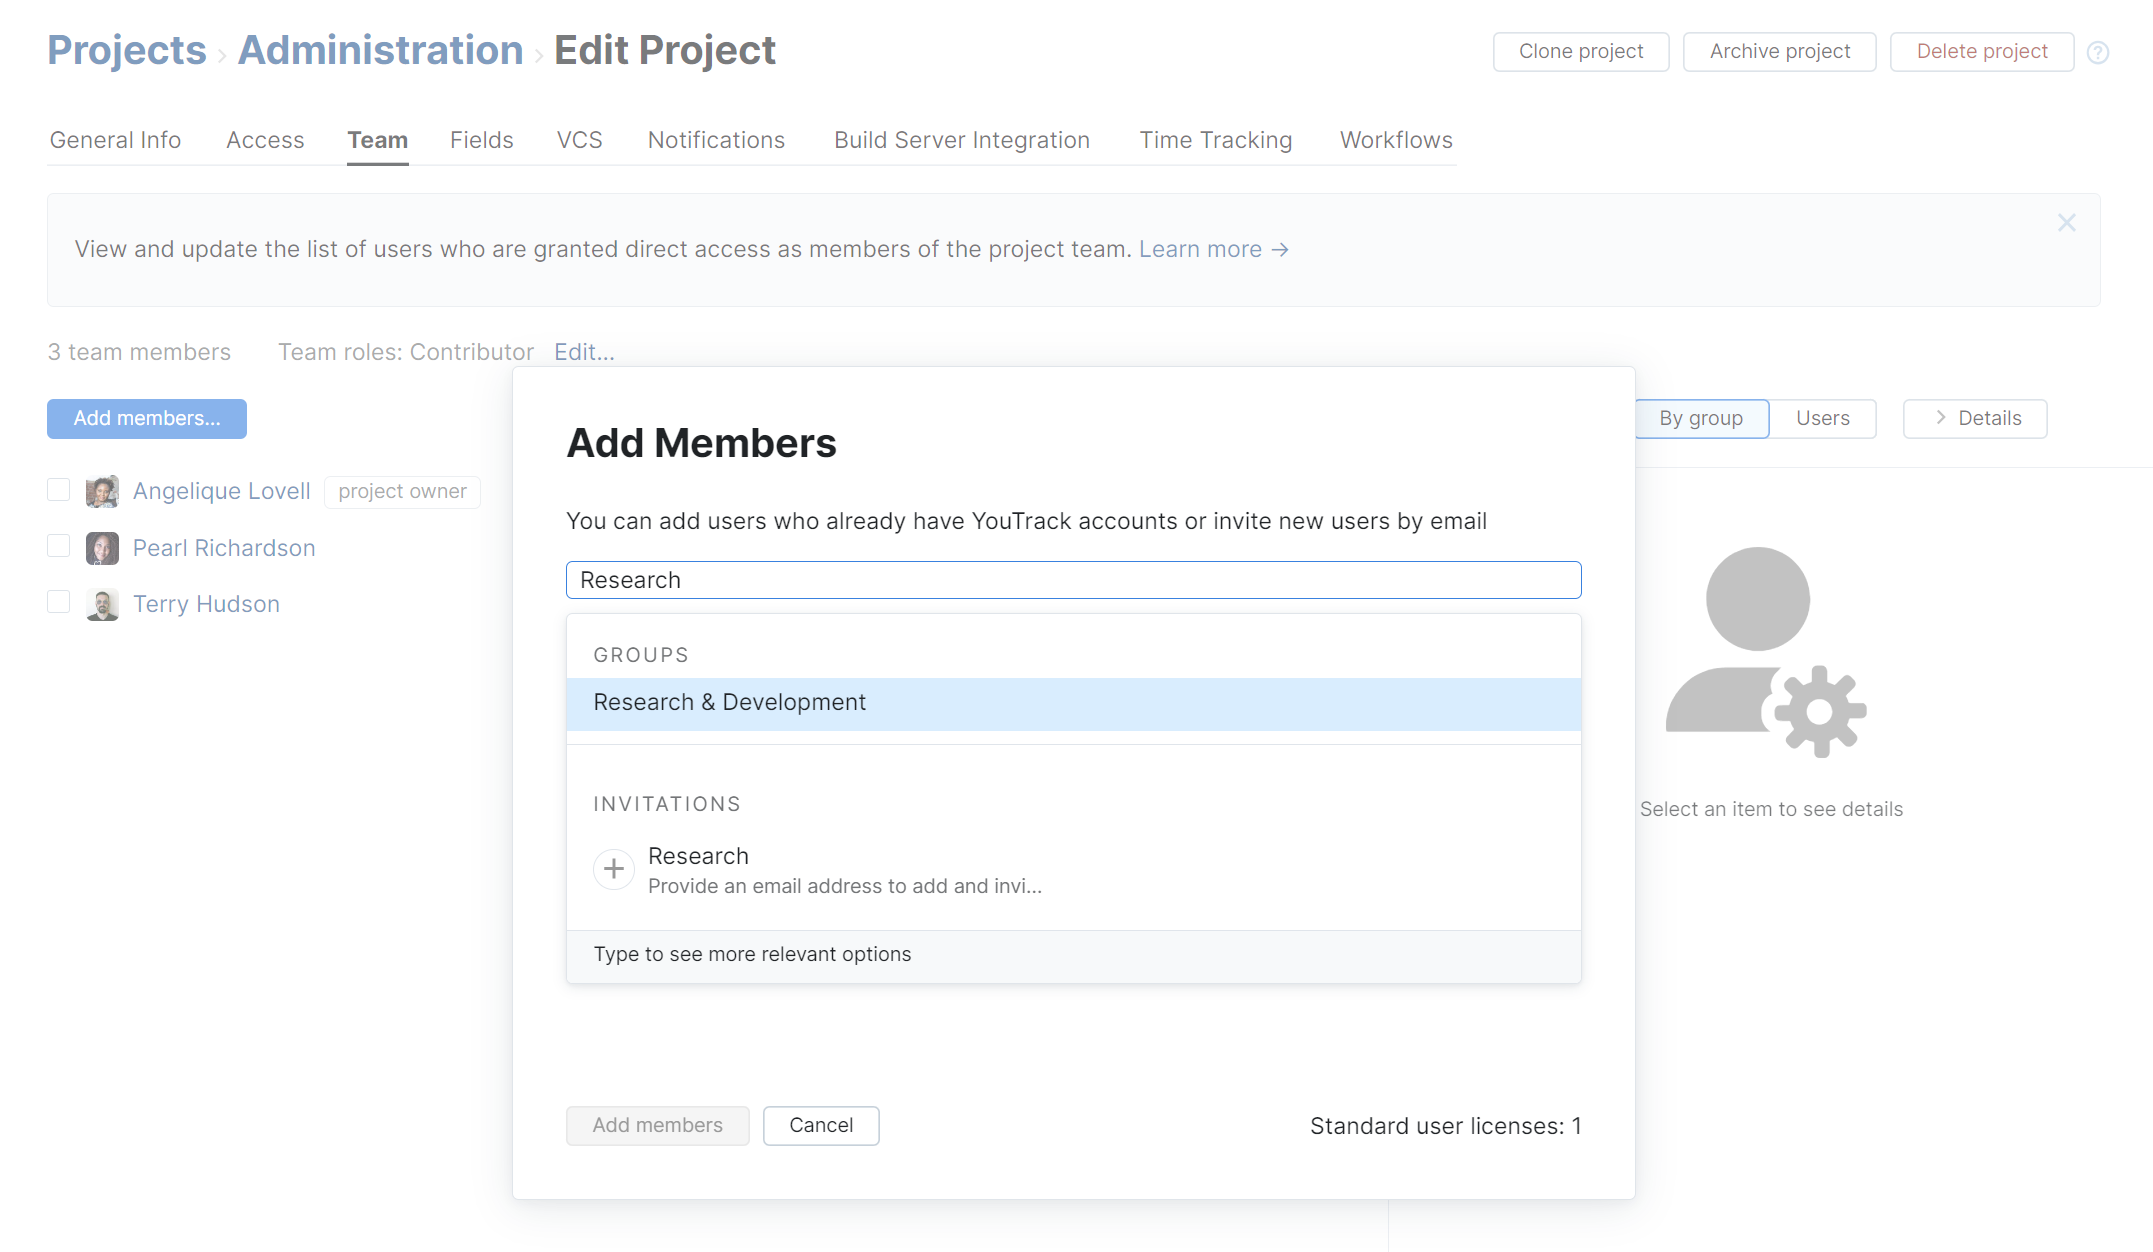 Options for adding groups to a project team.